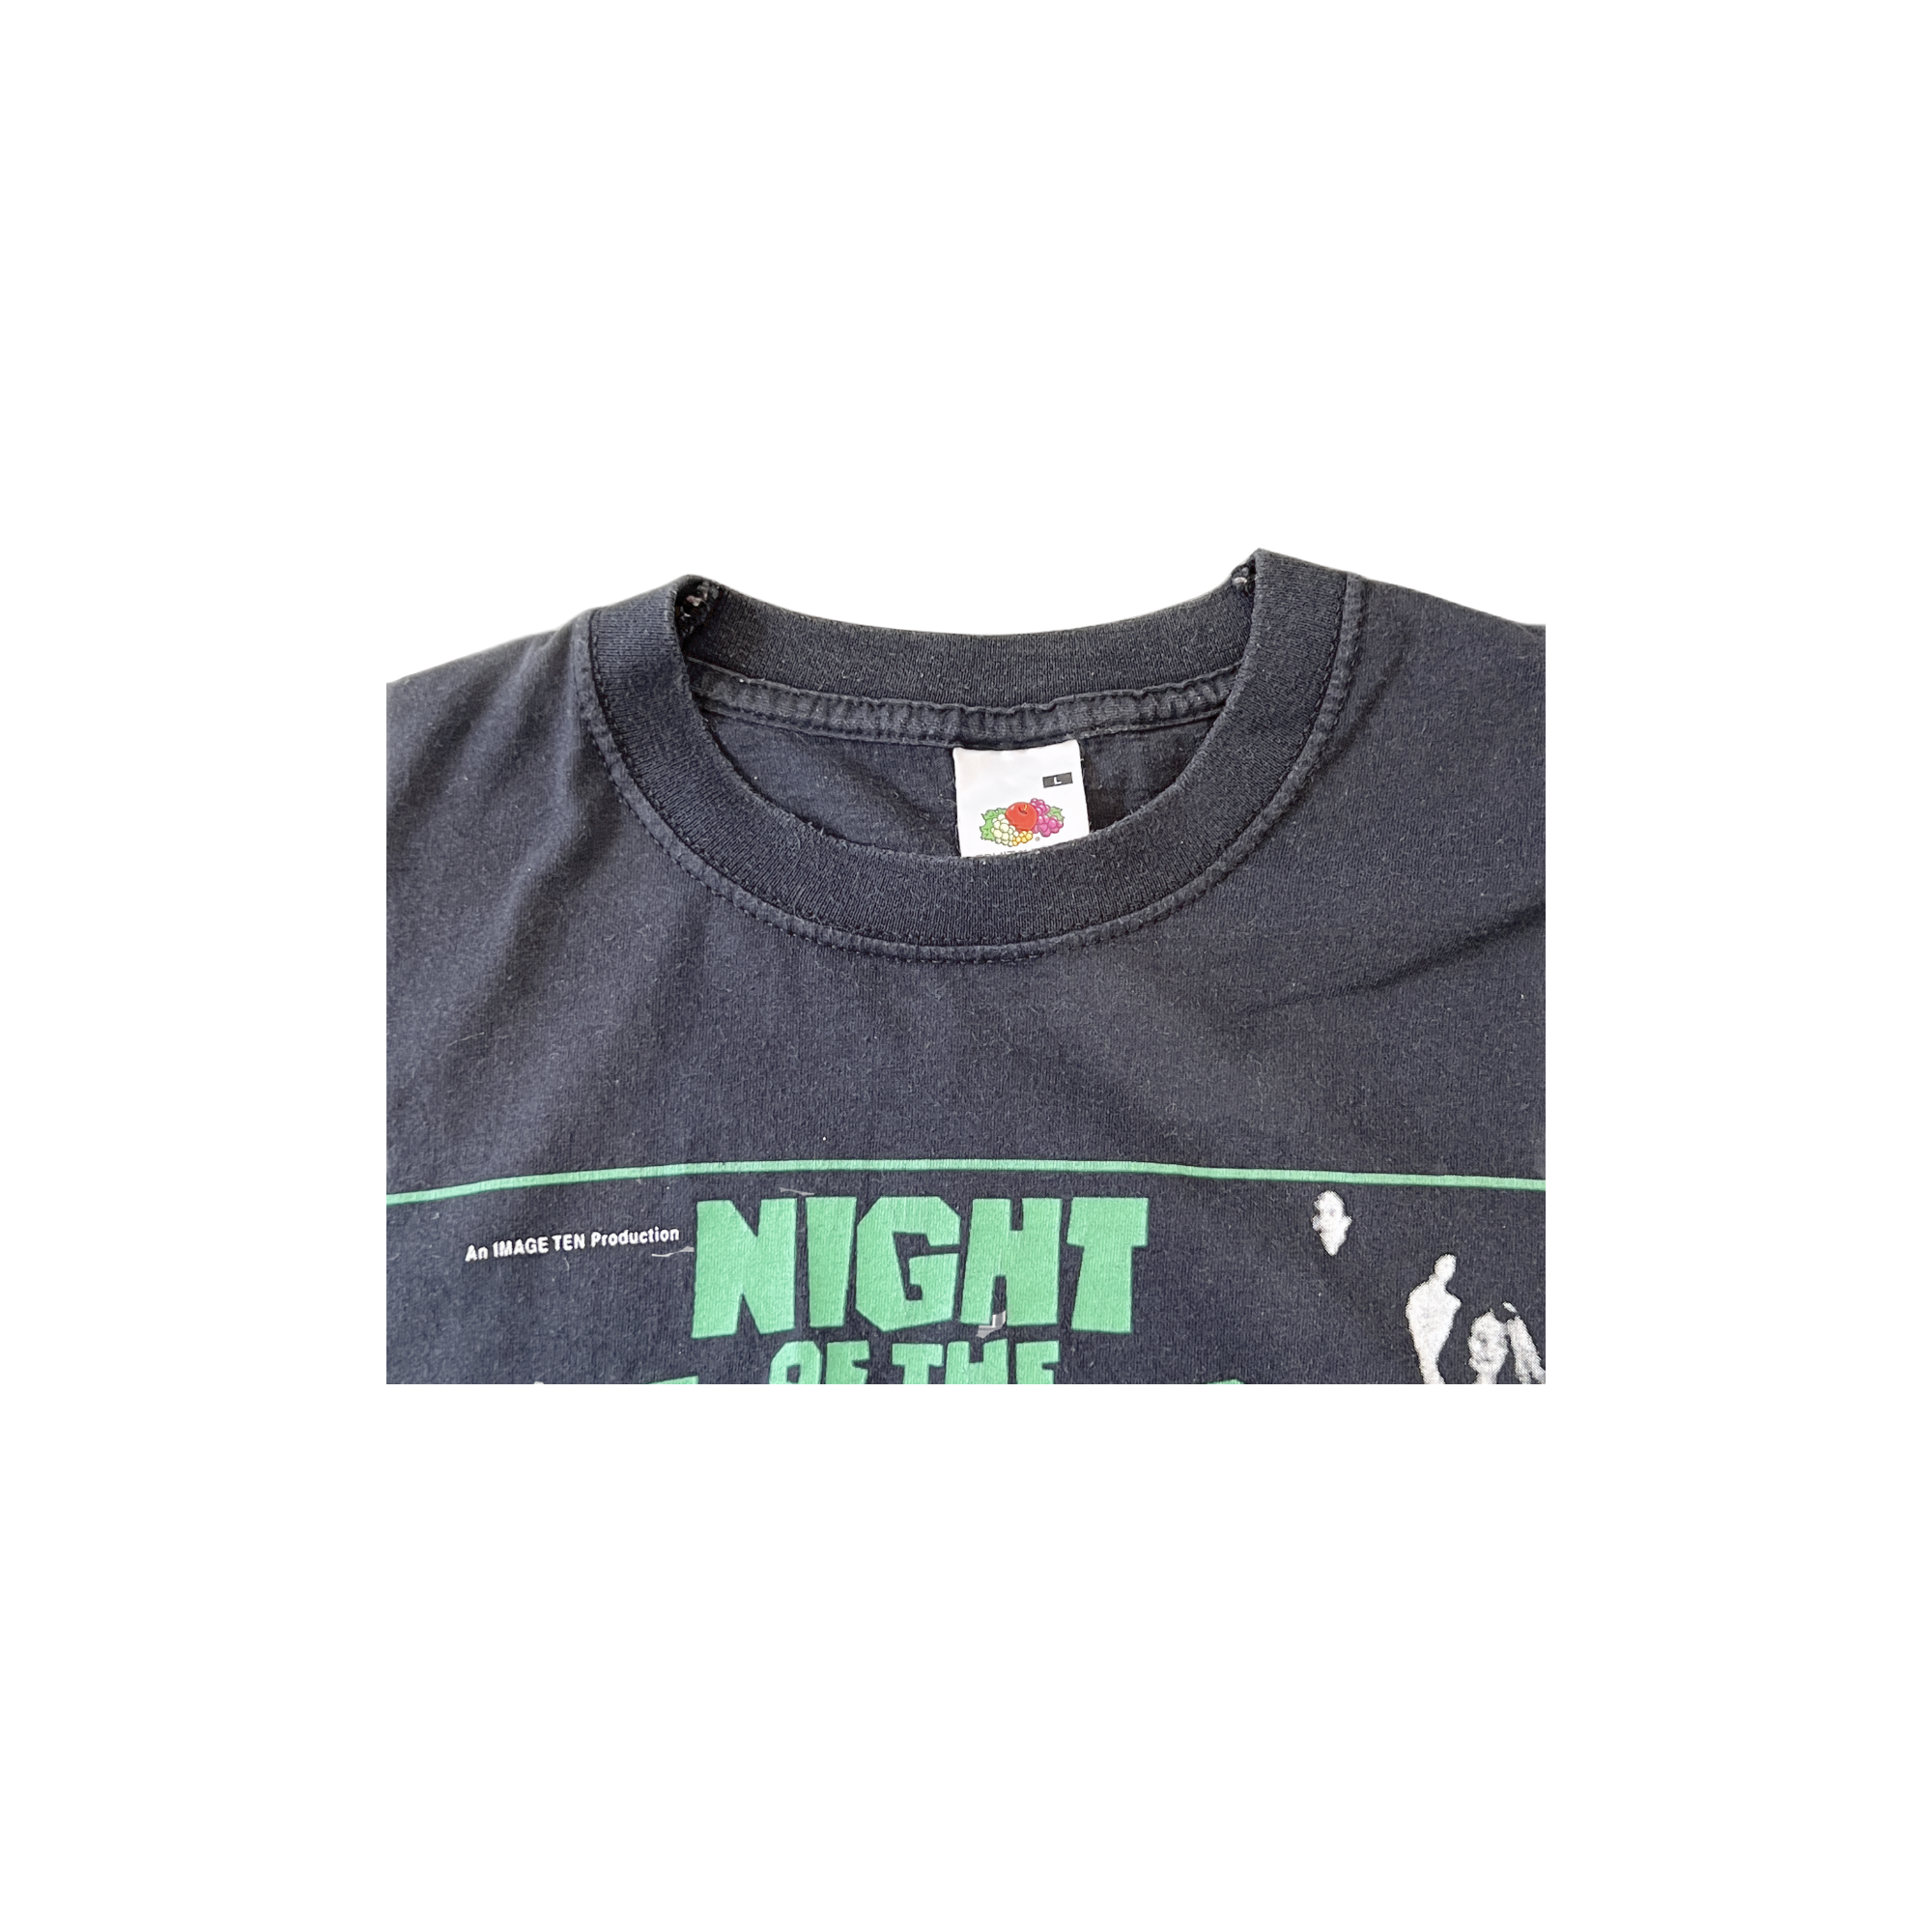 Night of the living dead - Tee